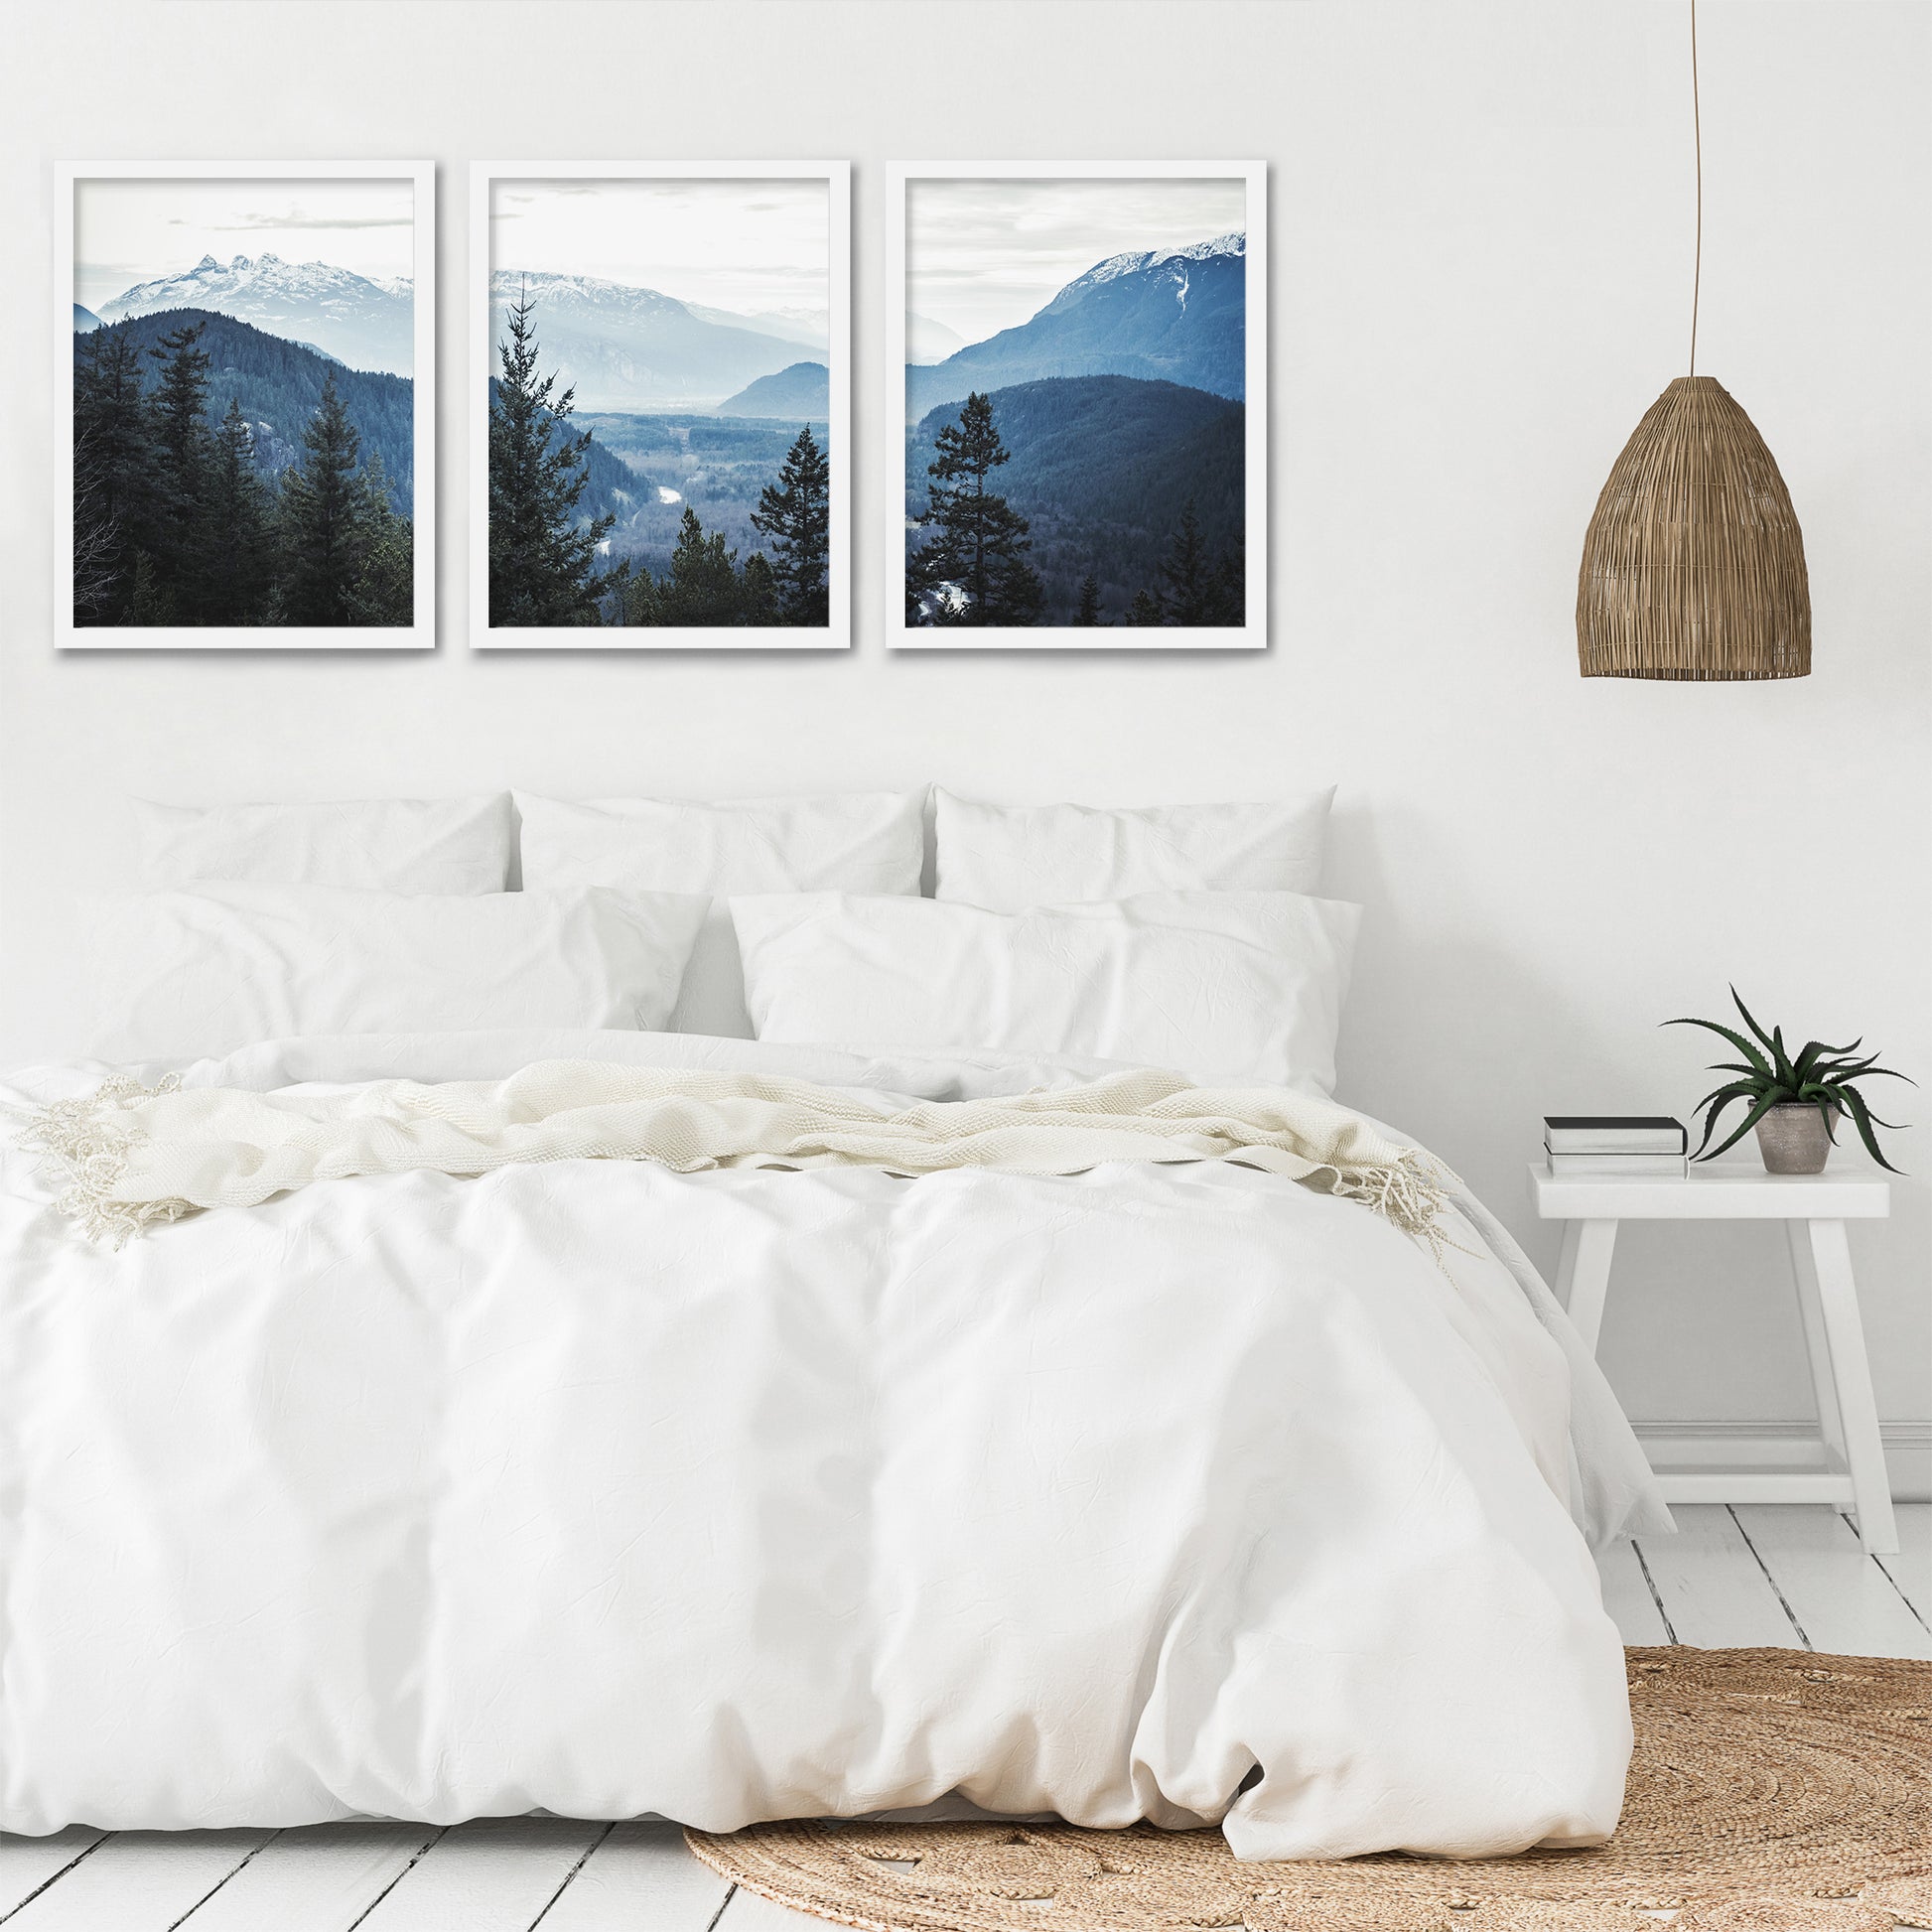 Morning Mountain Views by Tanya Shumkina - 3 Piece Framed Triptych Wall Art Set - Americanflat